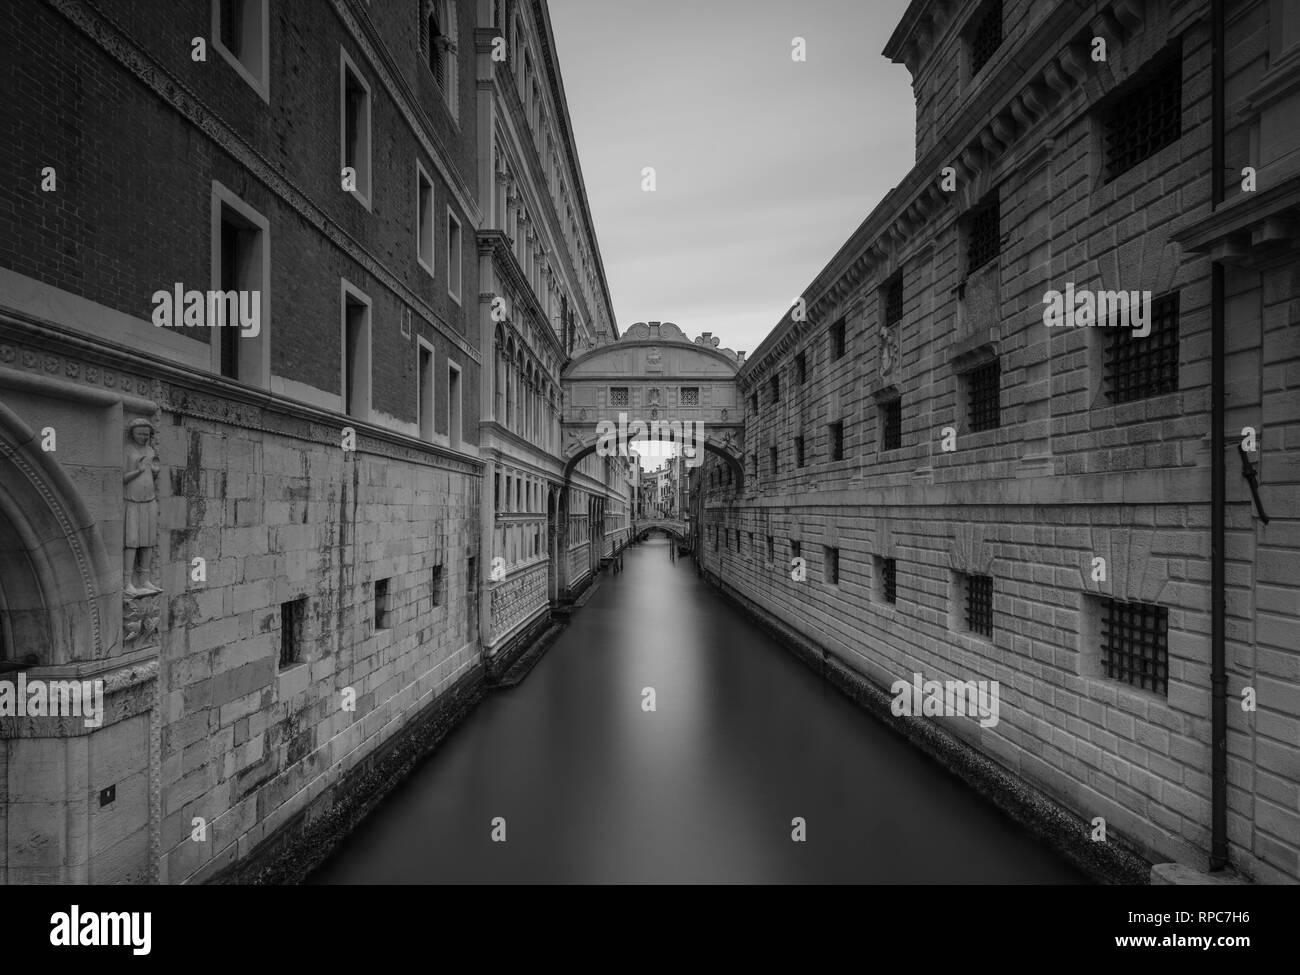 Getting Lost In Venice you get to stumble on to some amazing architecture this is The bridge of sighs. Stock Photo